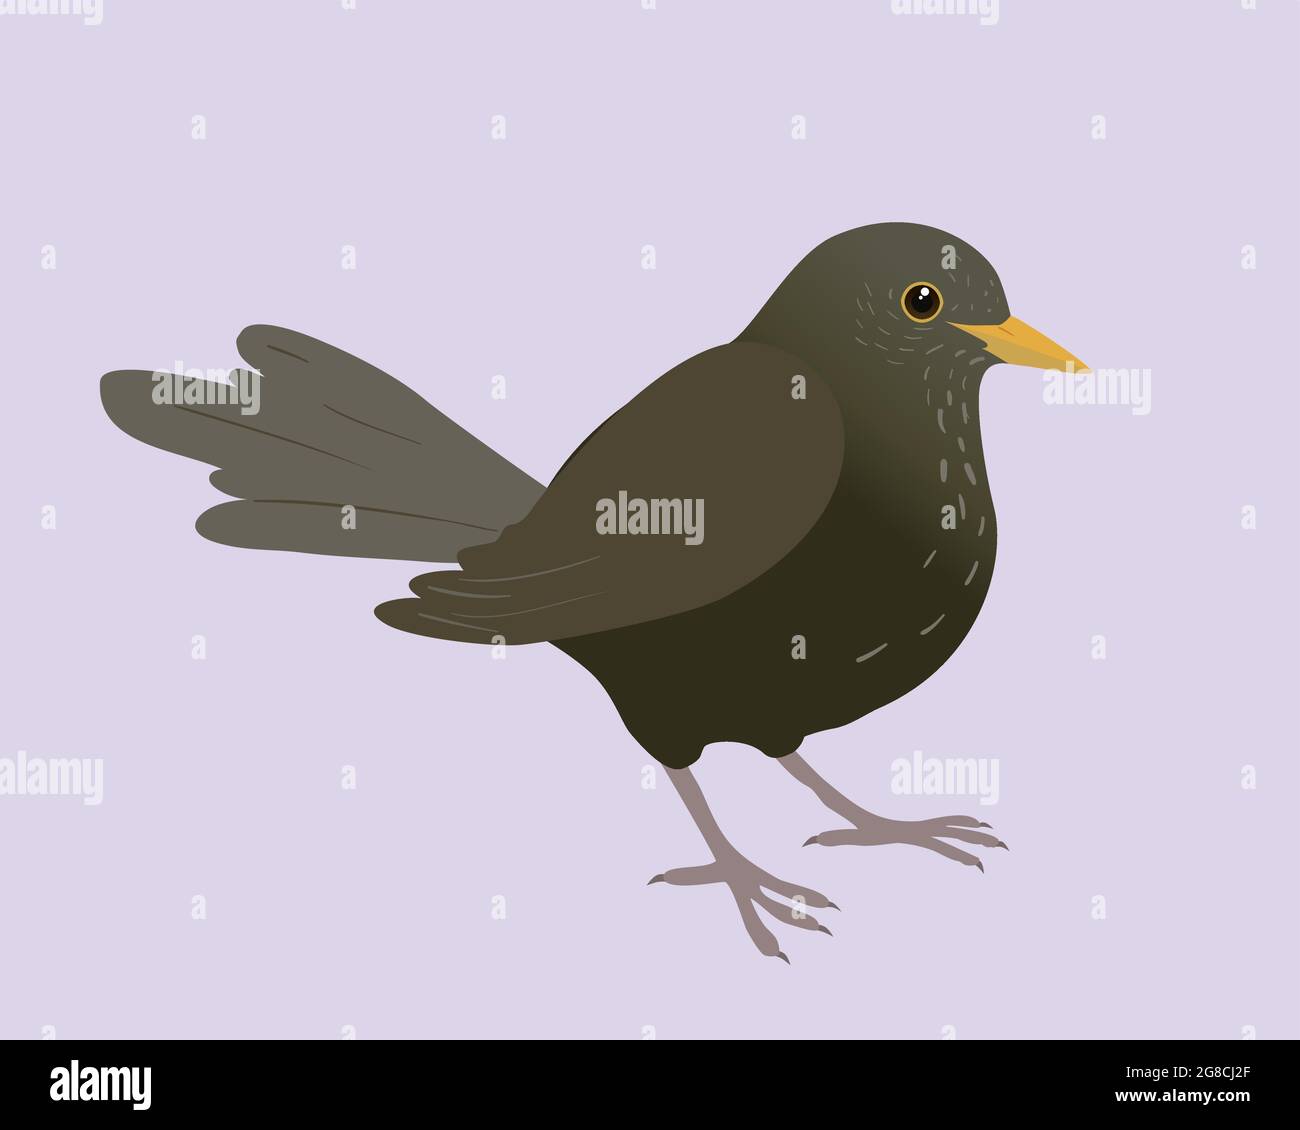 An illustration of a blackbird. It's a female bird and the background is pale lilac. The bird is cut out. Stock Vector